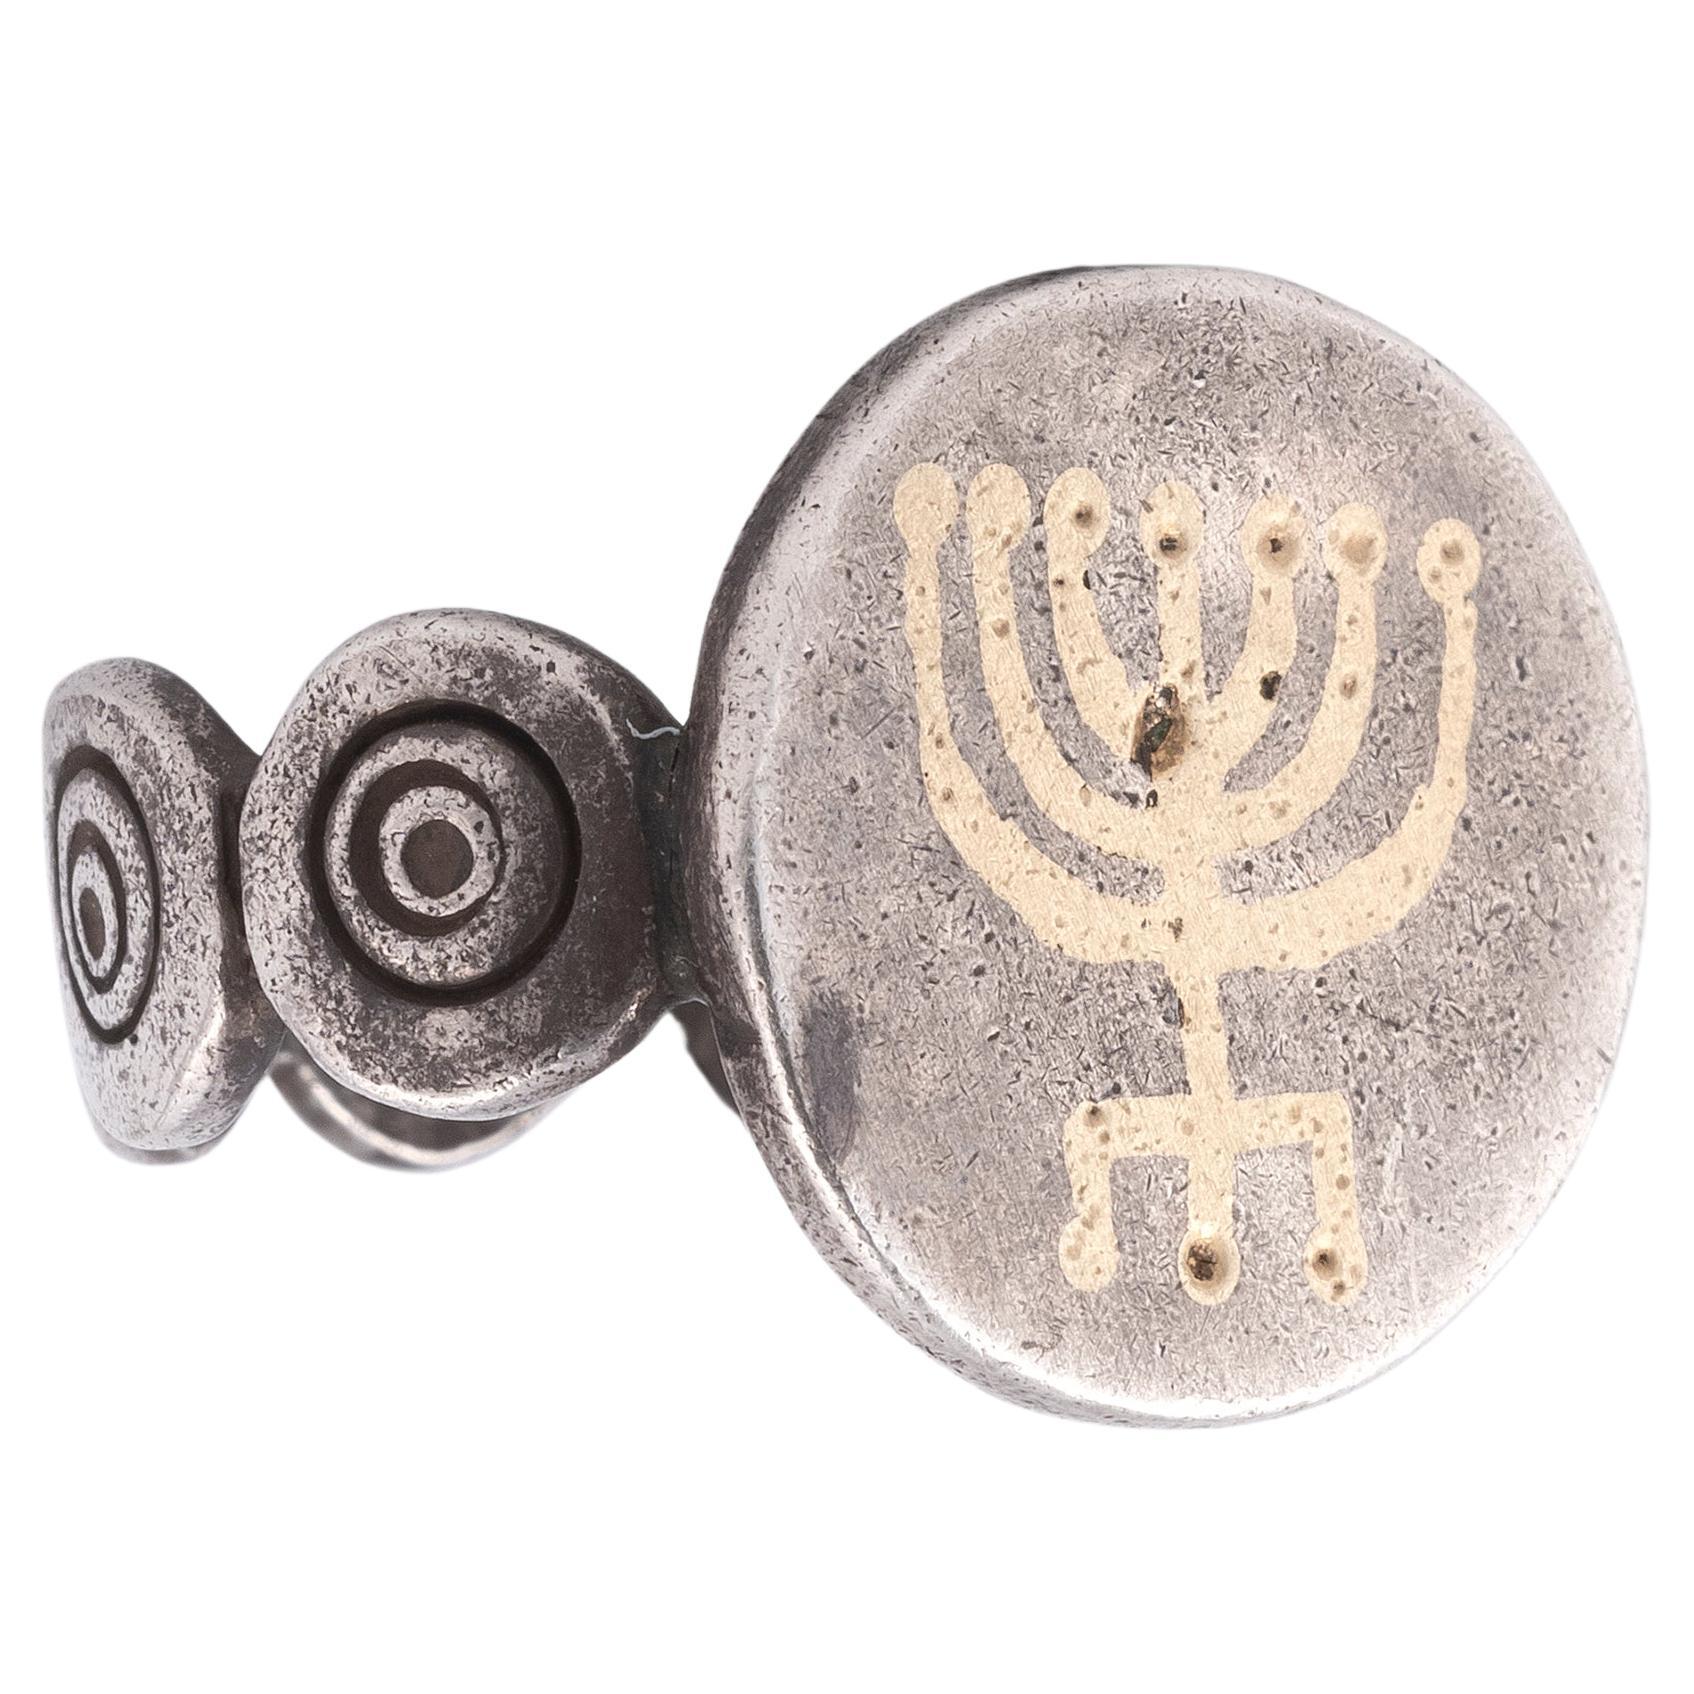 Silver ring with a gold coloured jewish menorah.
Period: 18th century
Dimensions: 1,7 mm, 9,2 gr.
Condition: good
Size 7 3/4